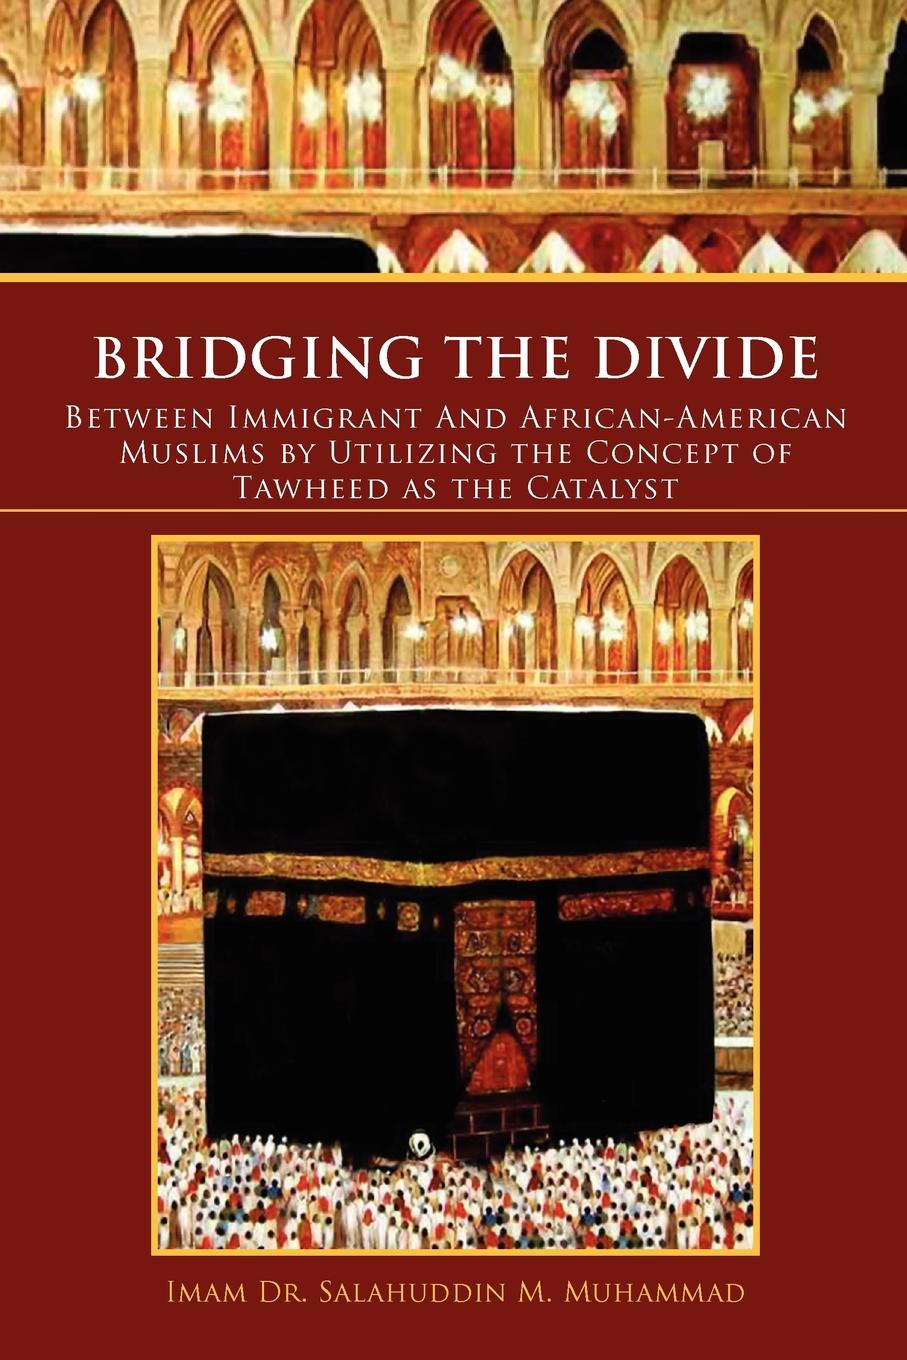 Bridging the Divide Between Immigrant and African American Muslims by Utilizing the Concept of Tawheed as the Catalyst. Between Immigrant and African